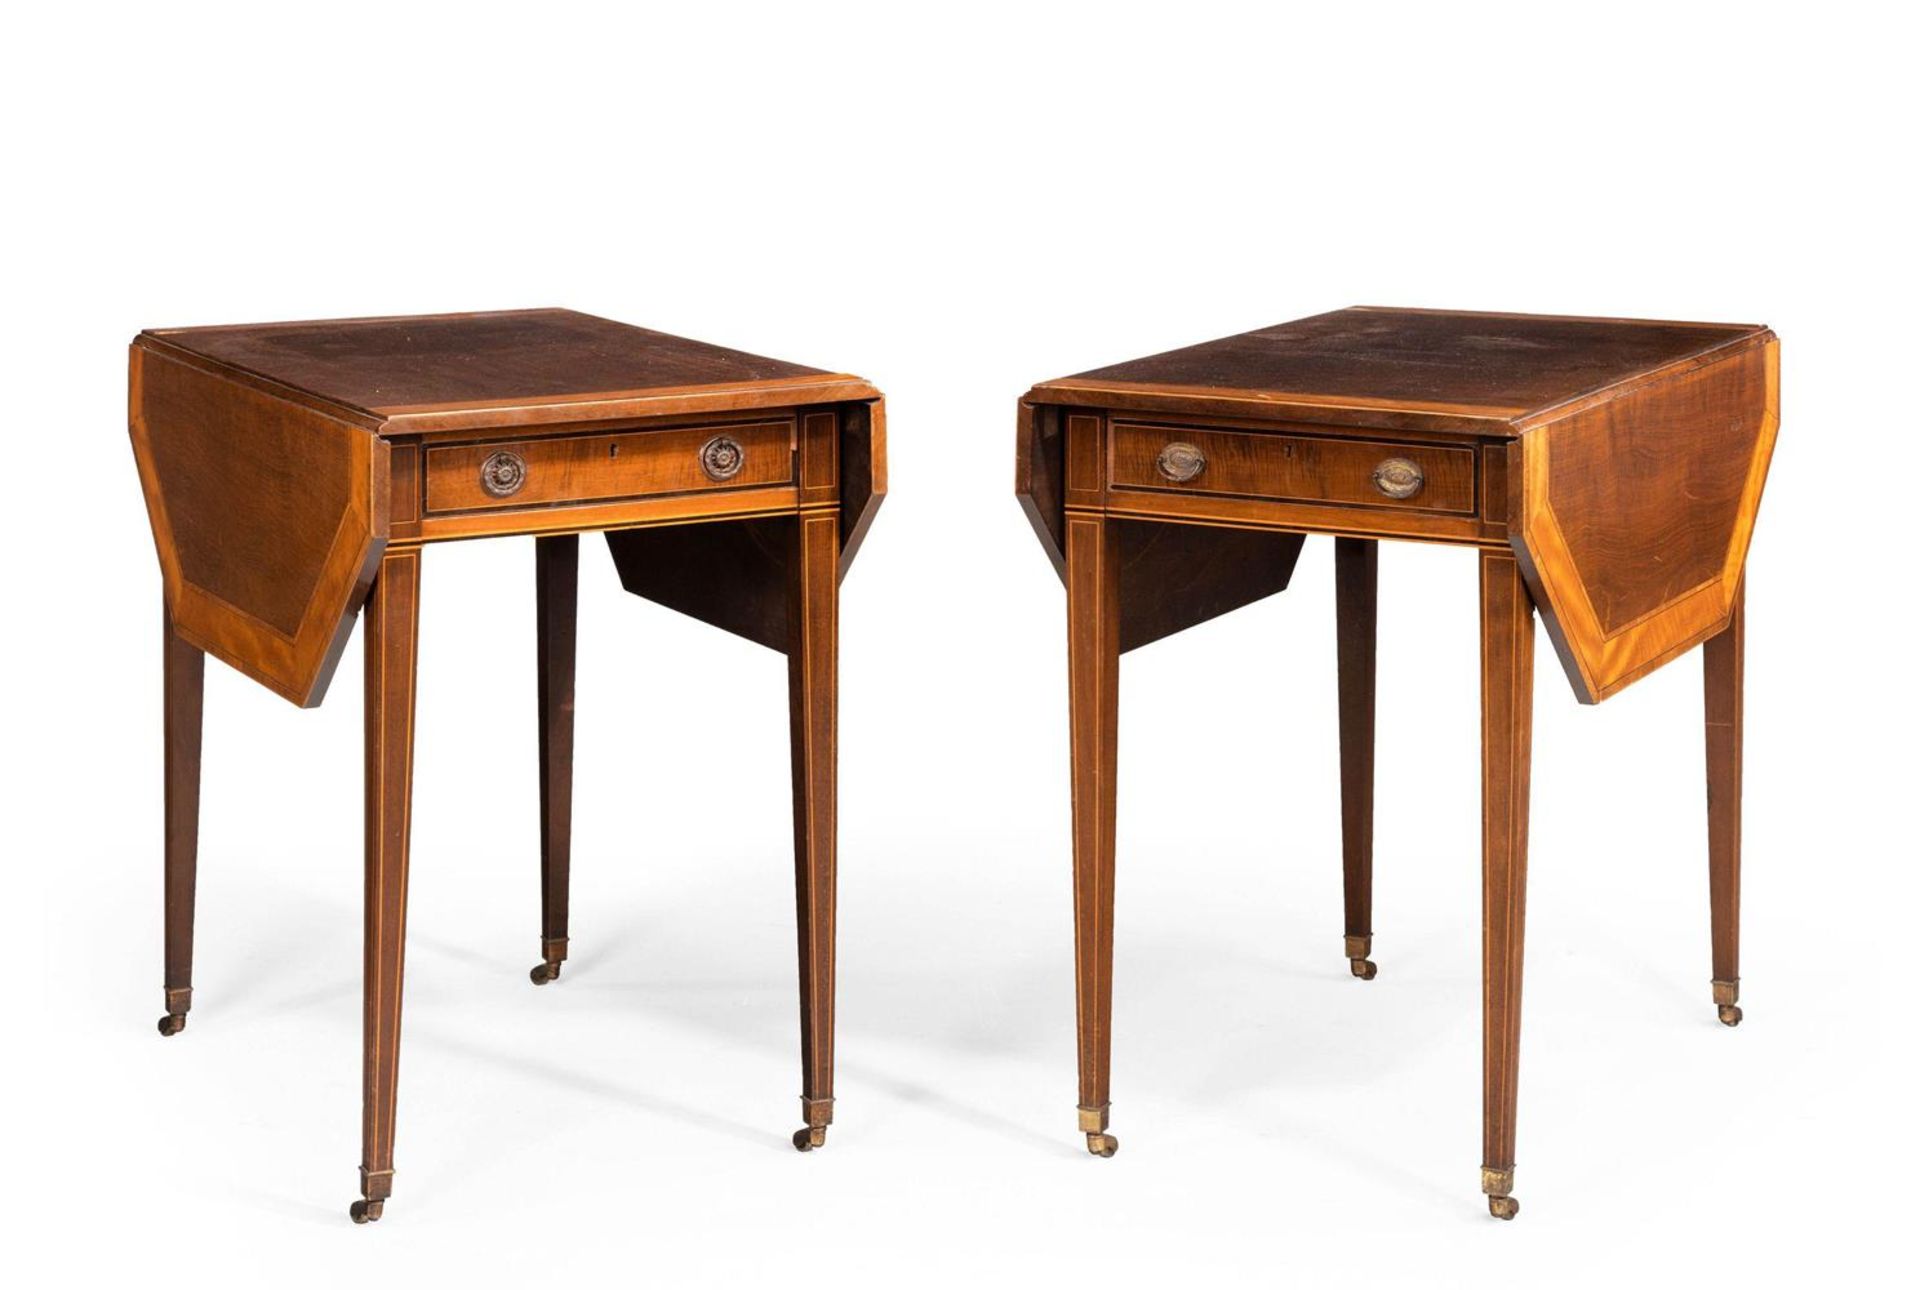 Y A MATCHED PAIR OF MAHOGANY, SATINWOOD AND TULIPWOOD PEMBROKE TABLES BY GILLOWS OF LANCASTER